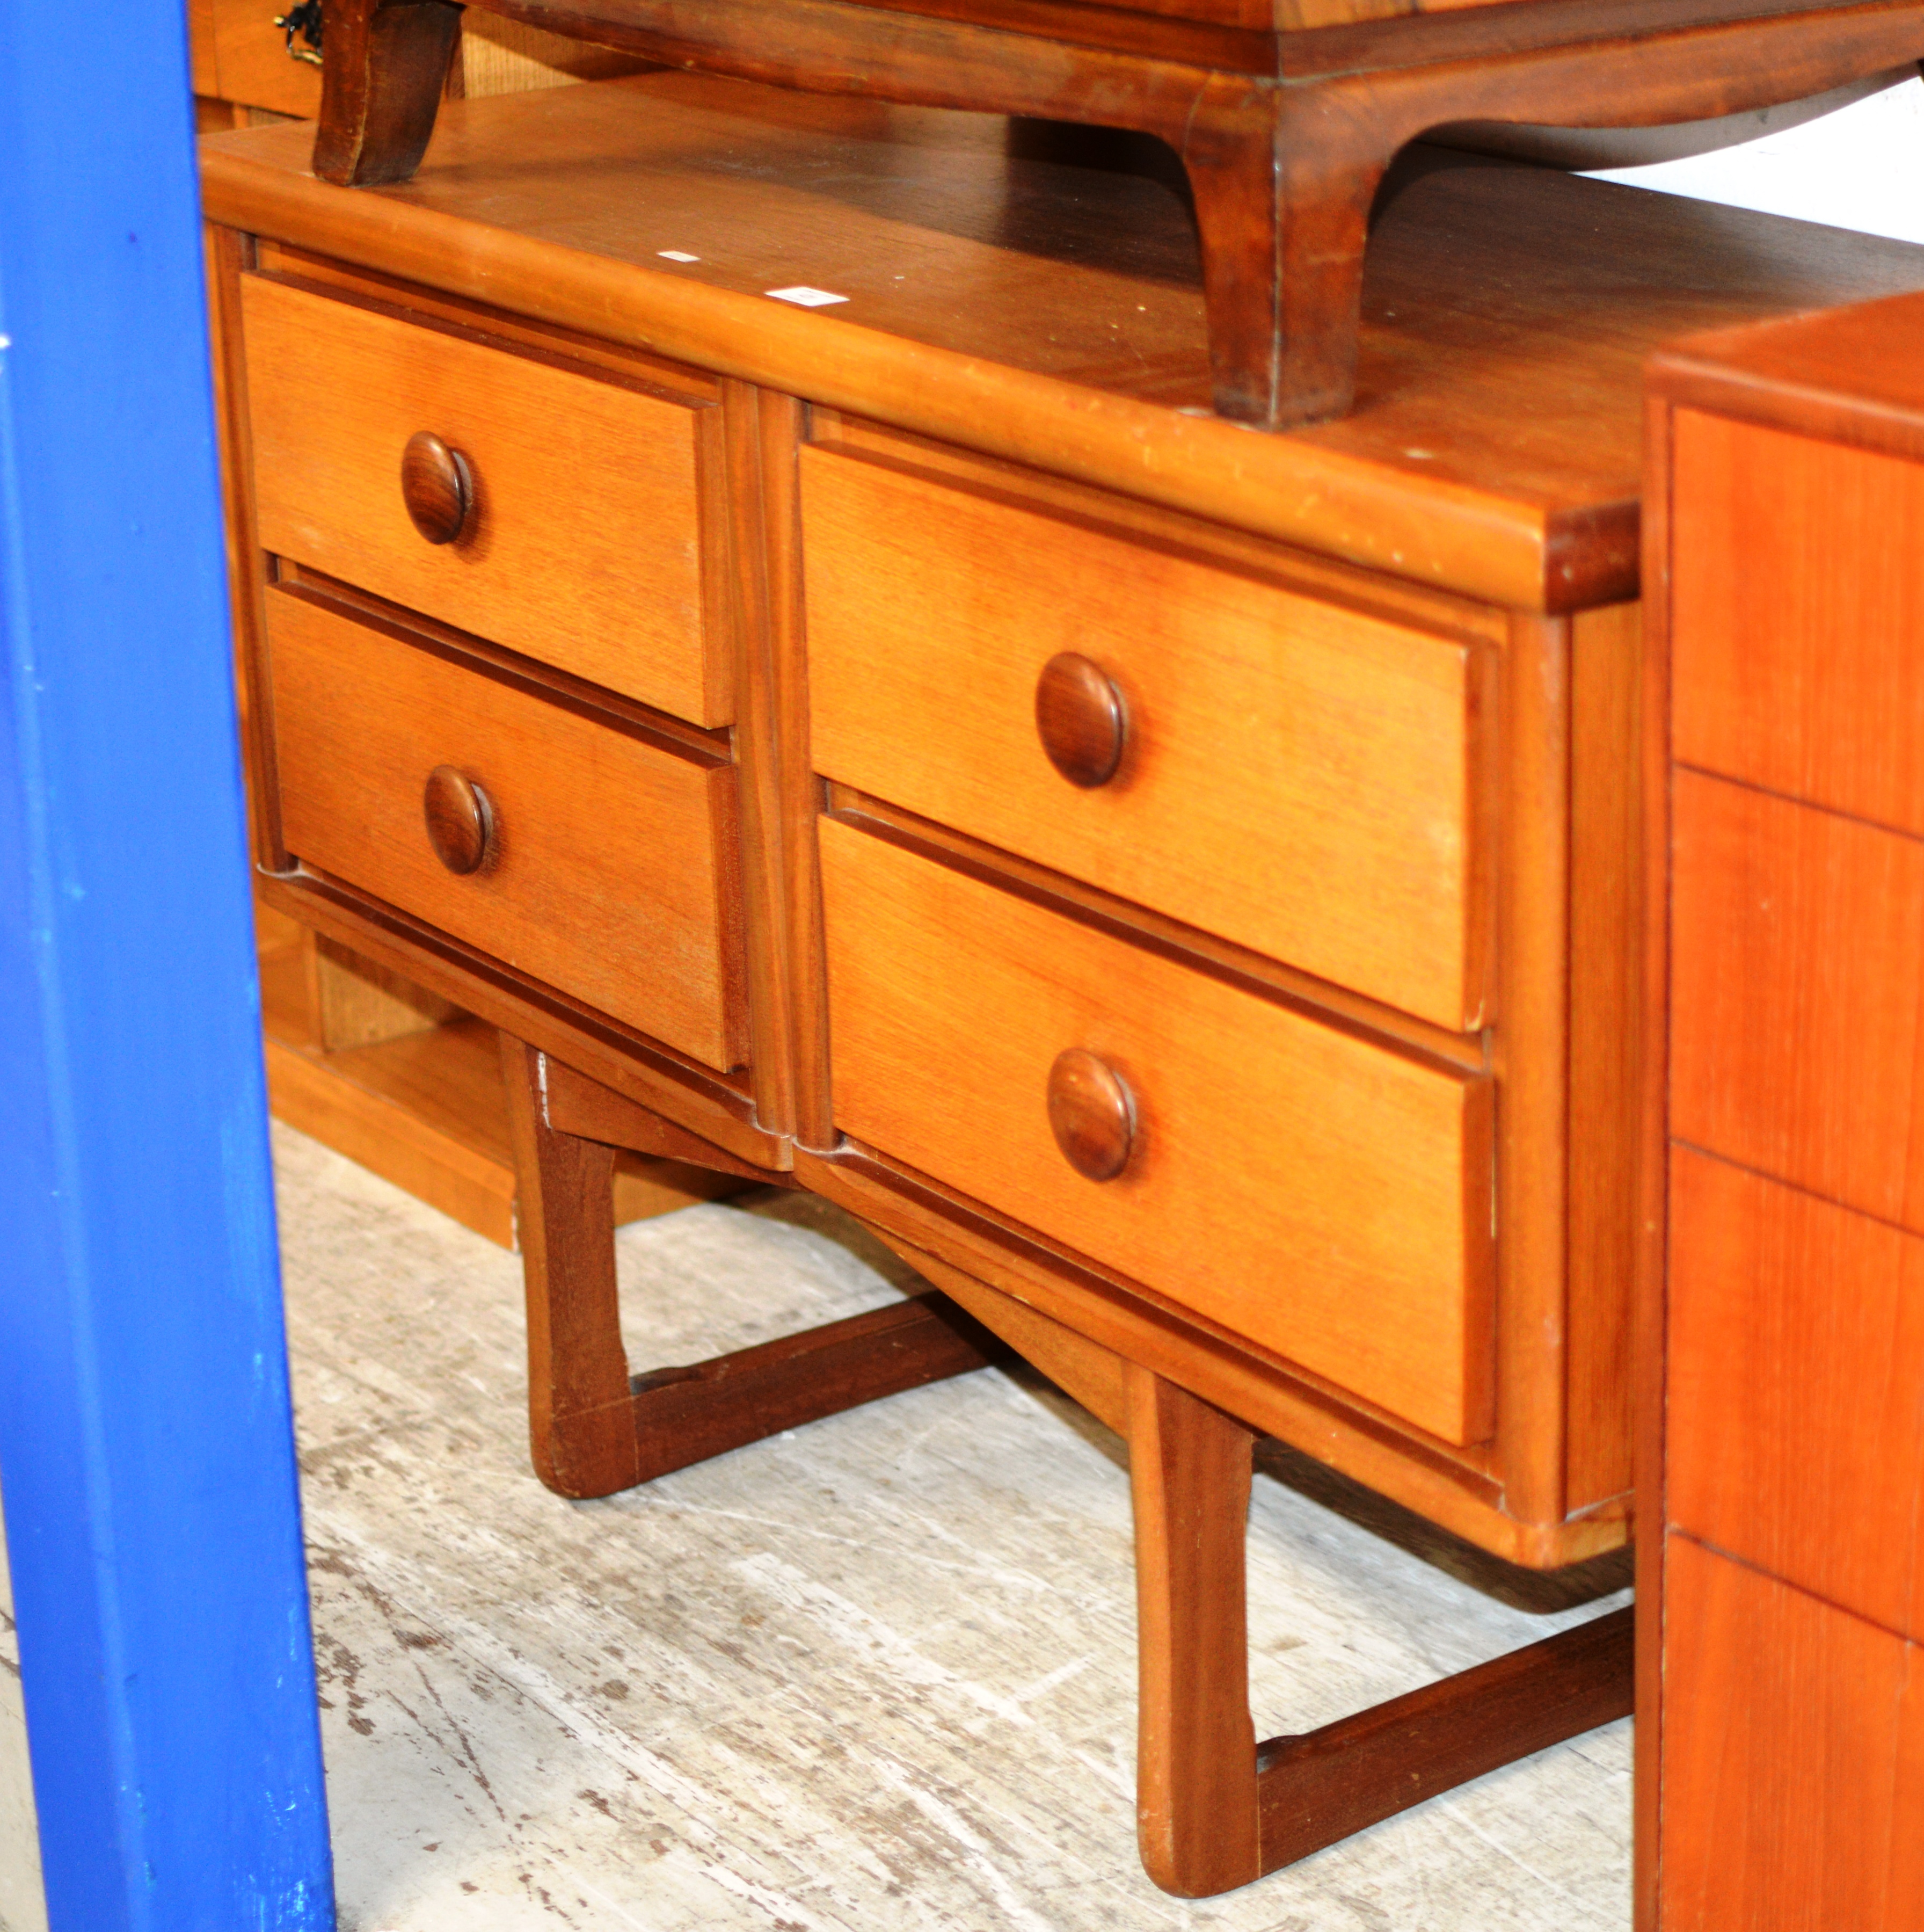 TEAK 4 DRAWER CHEST - APPROXIMATE DIMENSIONS = 27½" x 45" x 18½" (HxWxD)